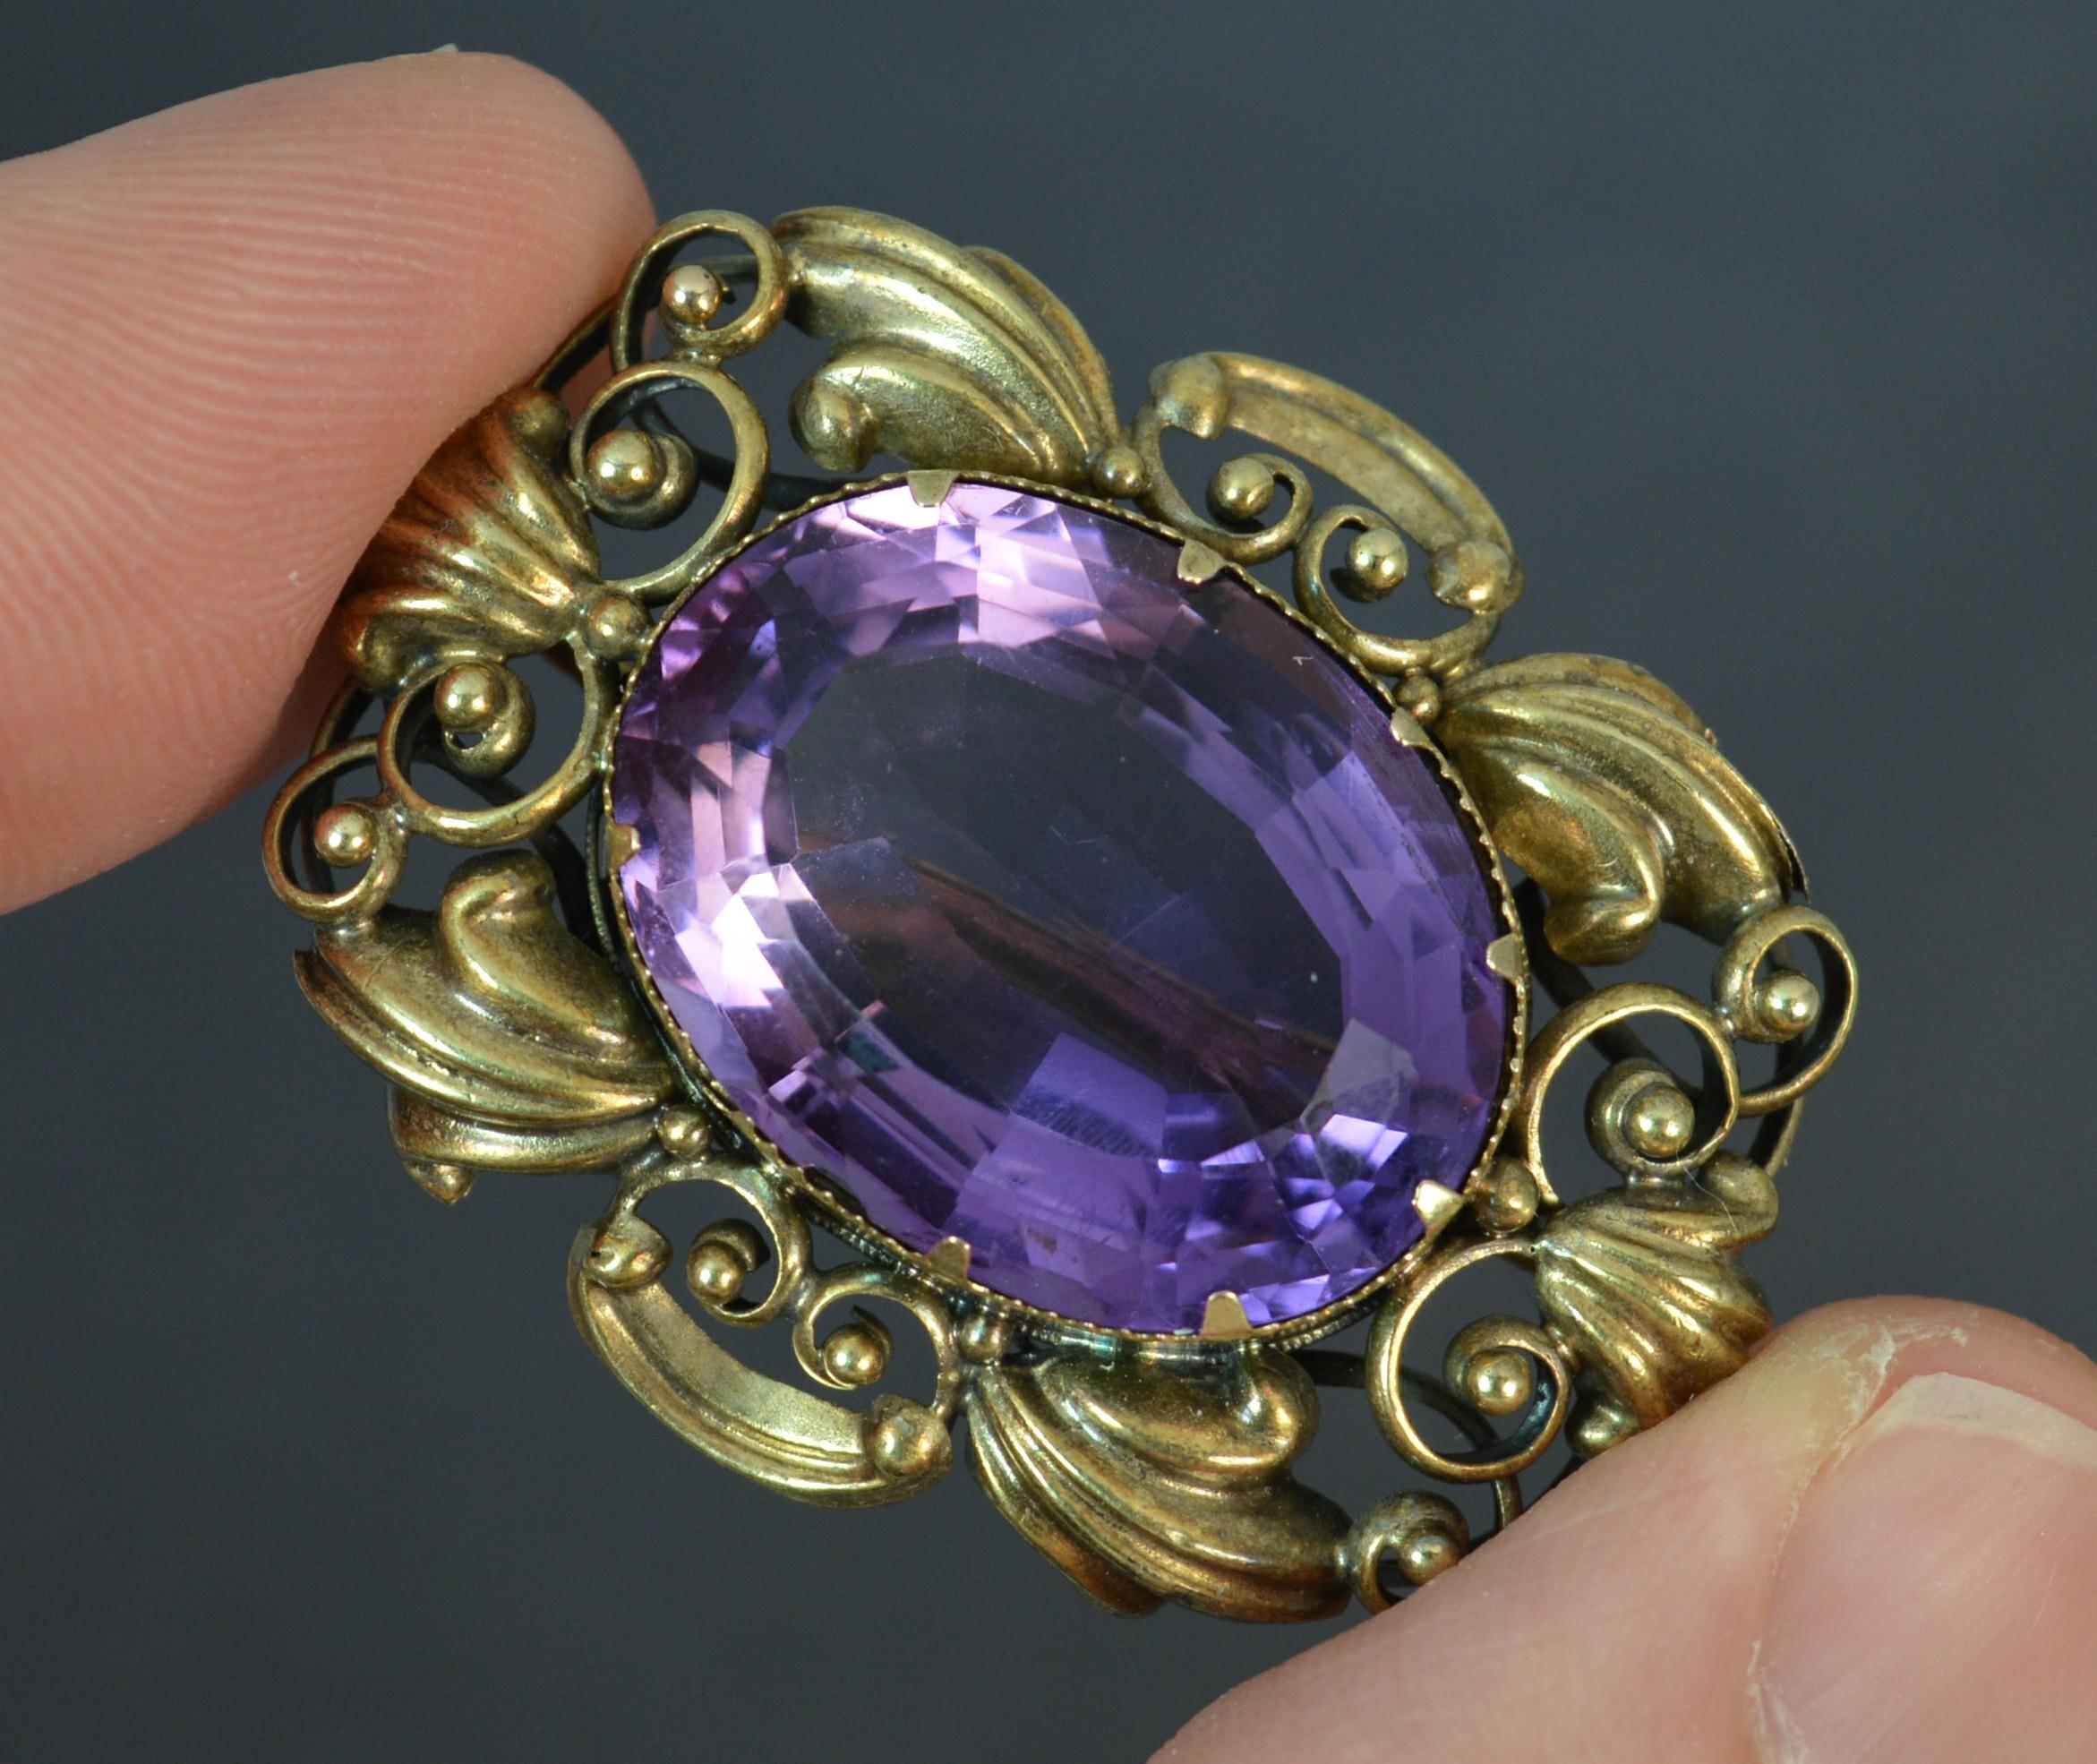 Women's Early Victorian 15 Carat Gold and Amethyst Statement Brooch